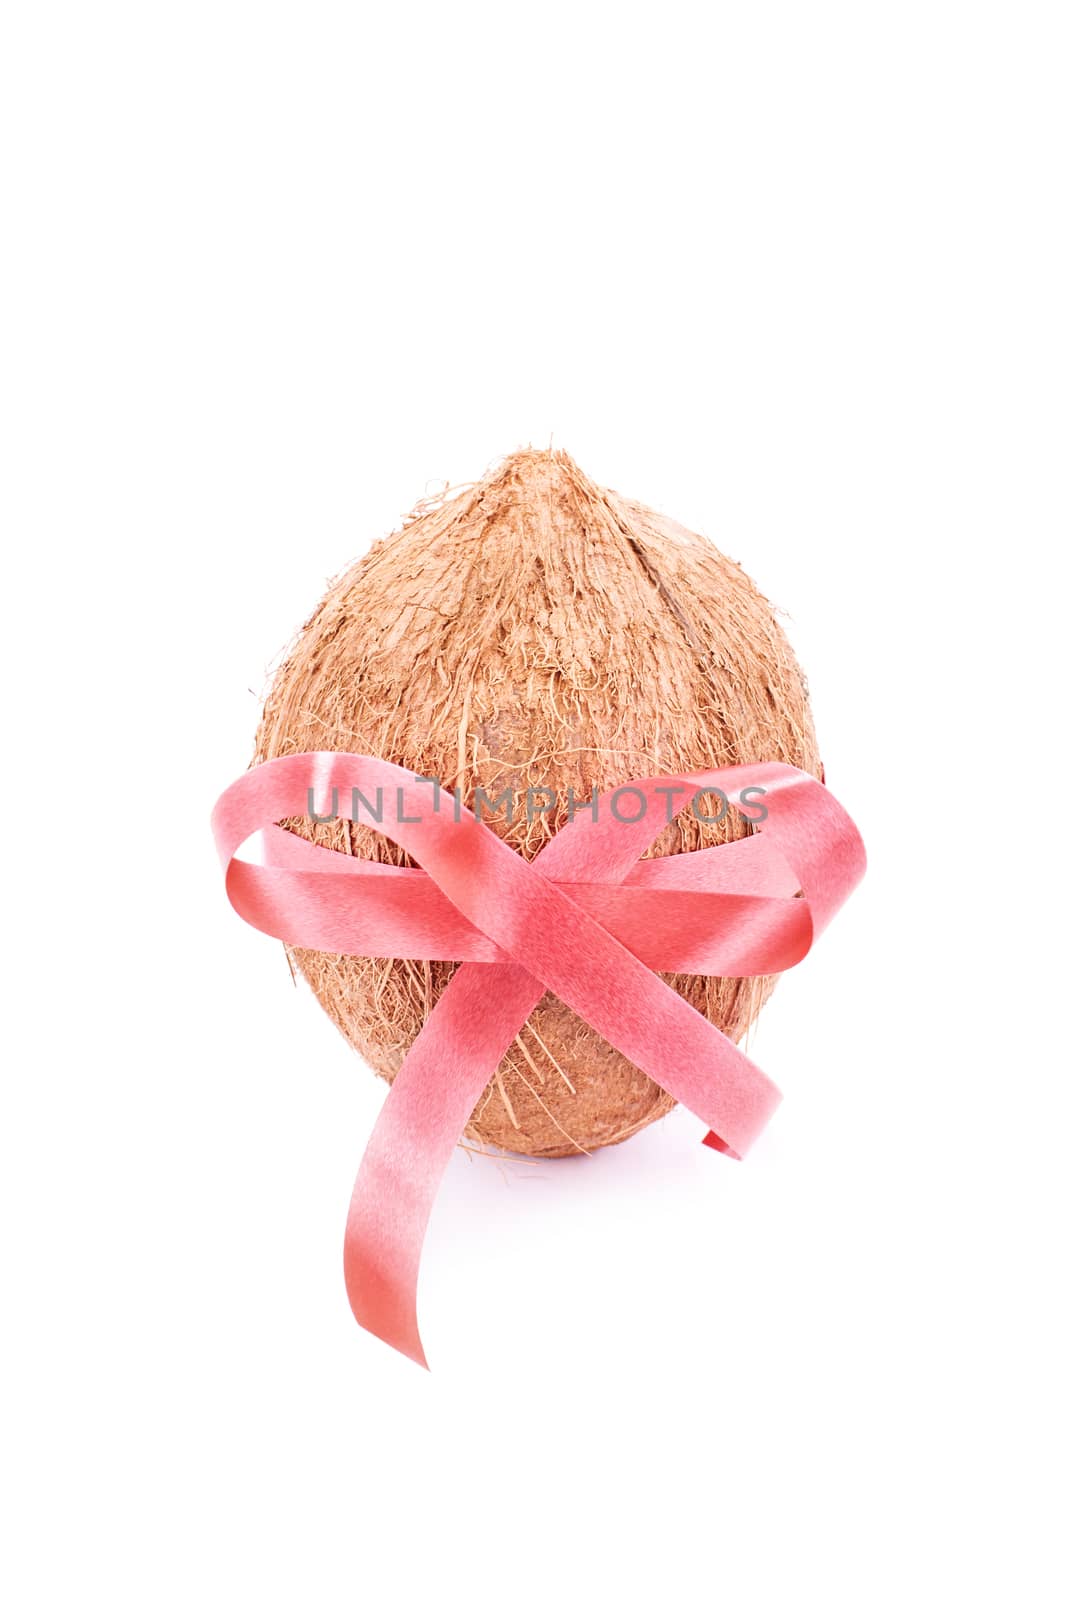 Coconut gift by Mendelex